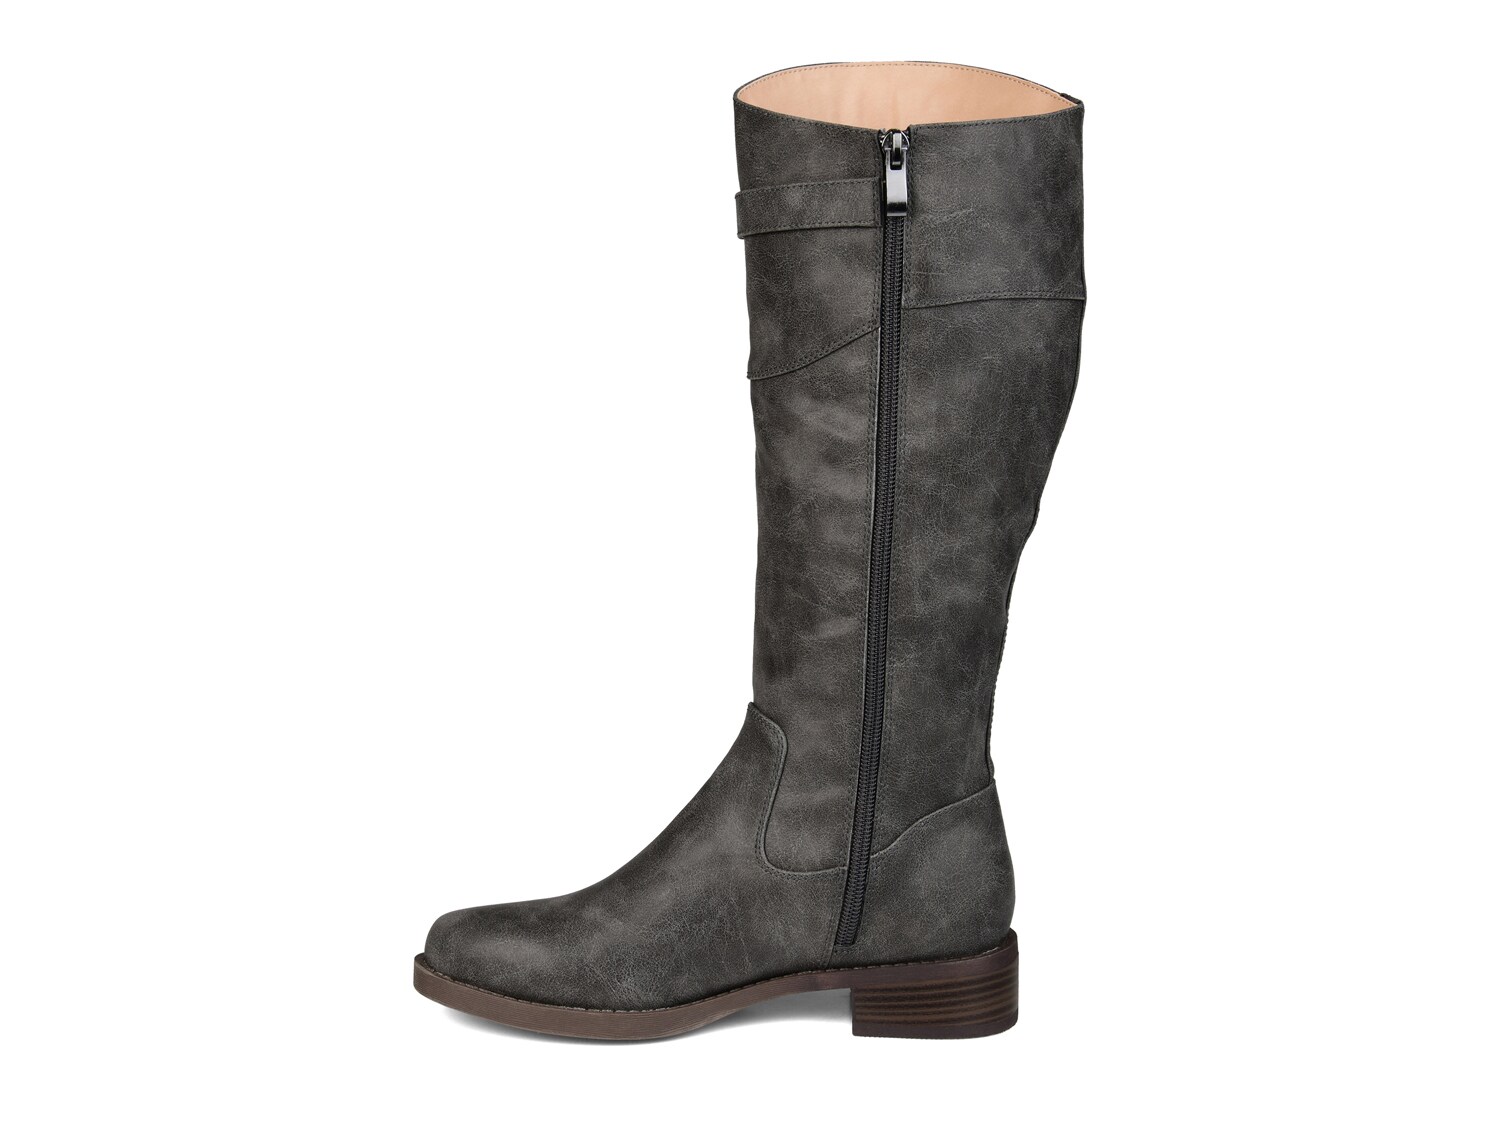 Journee Collection Brooklyn Wide Calf Riding Boot Women's Shoes | DSW